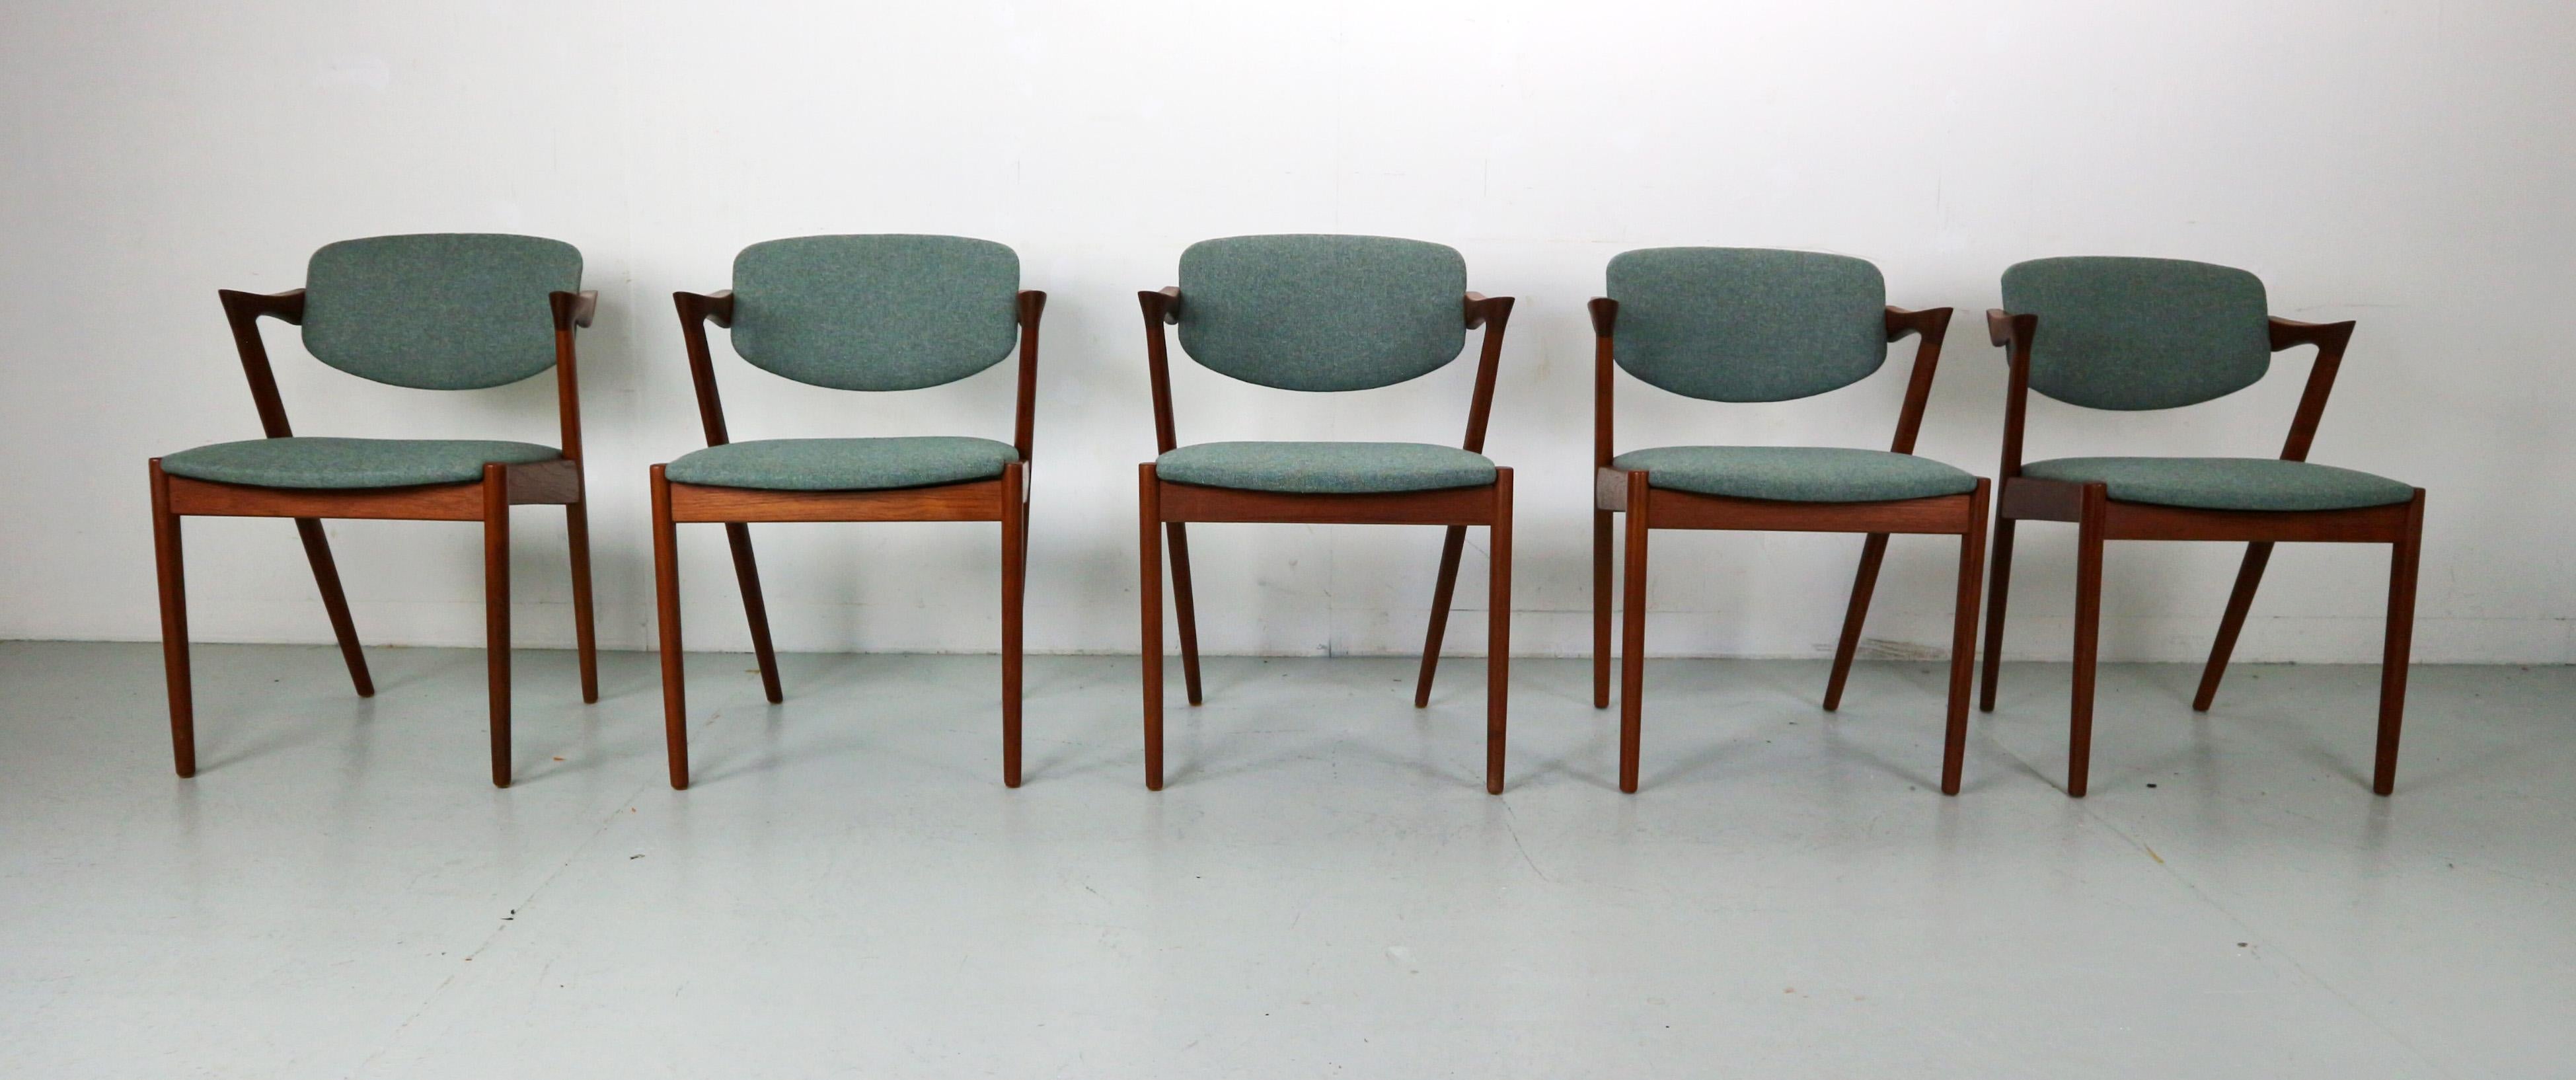 Set of five vintage dining chairs designed by Kai Kristiansen (Model 42). Produced in Denmark by Schou Andersen Møbelfabrik in the 60s. Frame made of teak and reupholstered in a high quality wool fabric by the Norwegian manufacturer Gudbrandsdalens